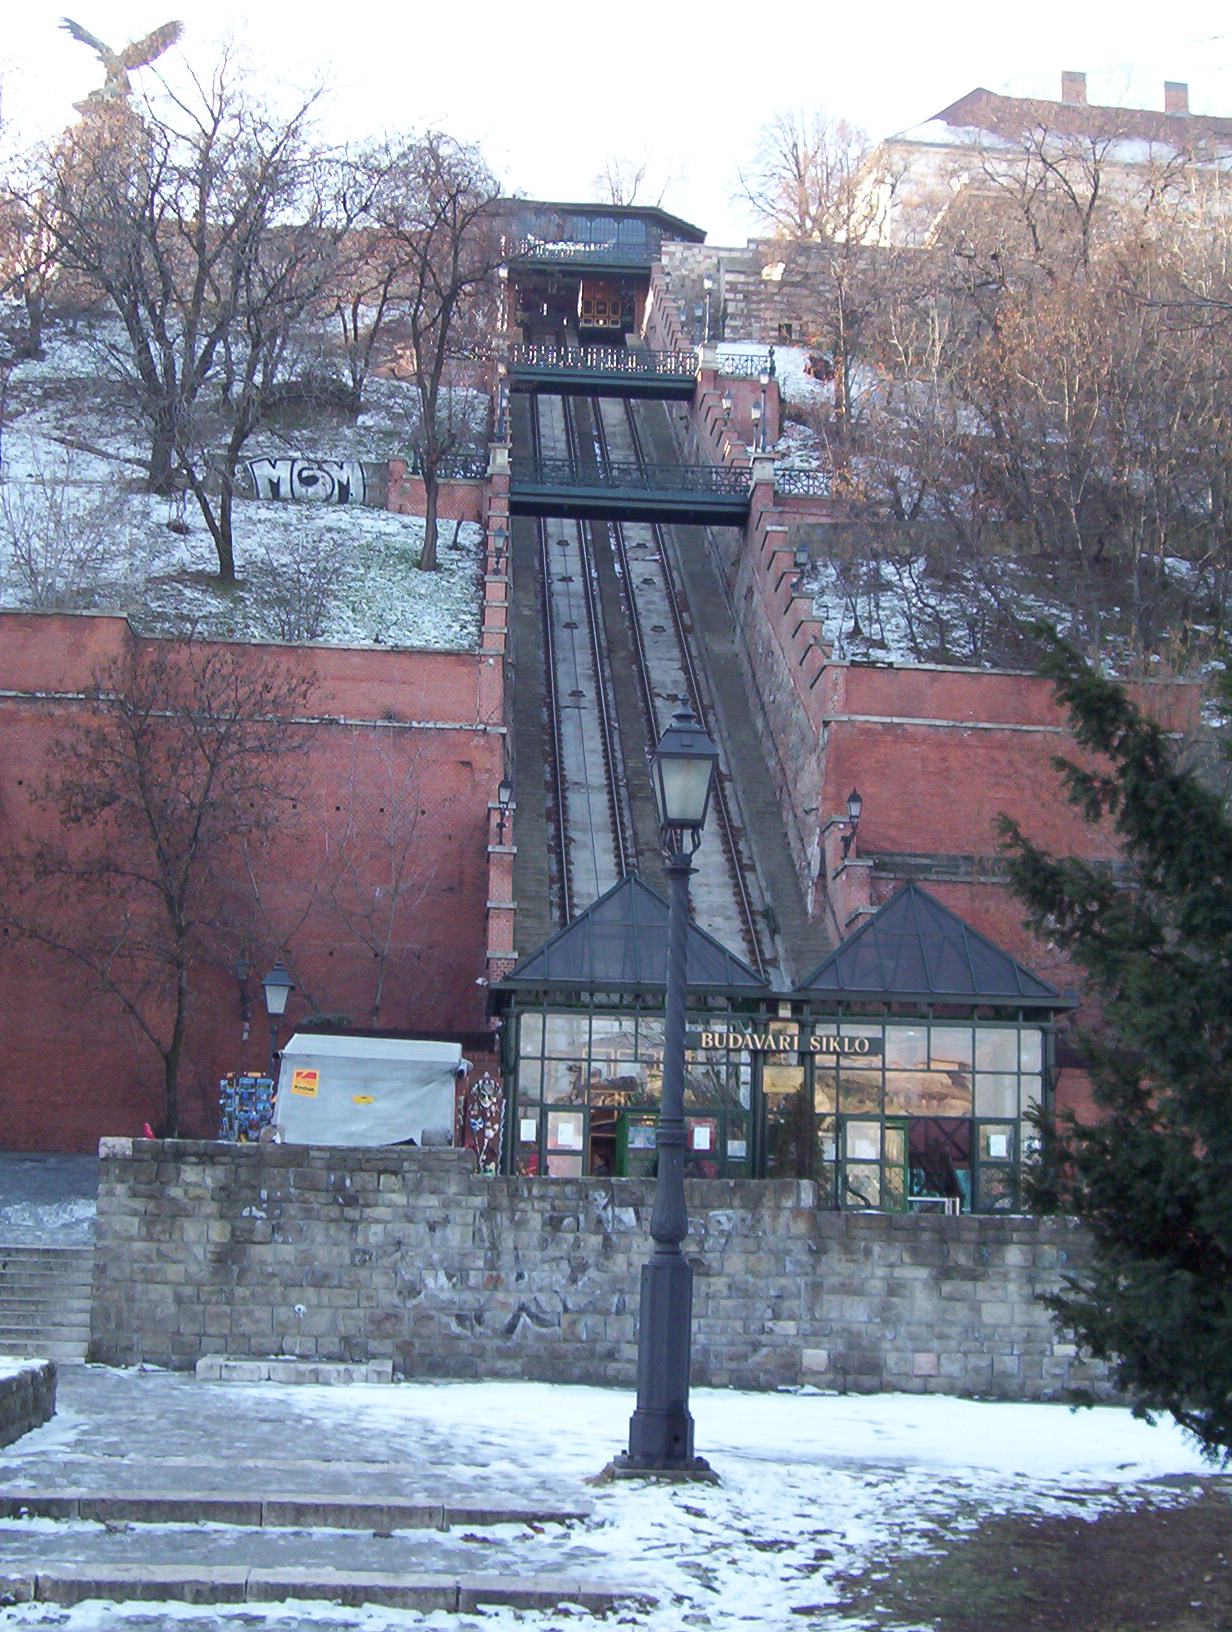 an escalator and clock tower in the middle of the winter